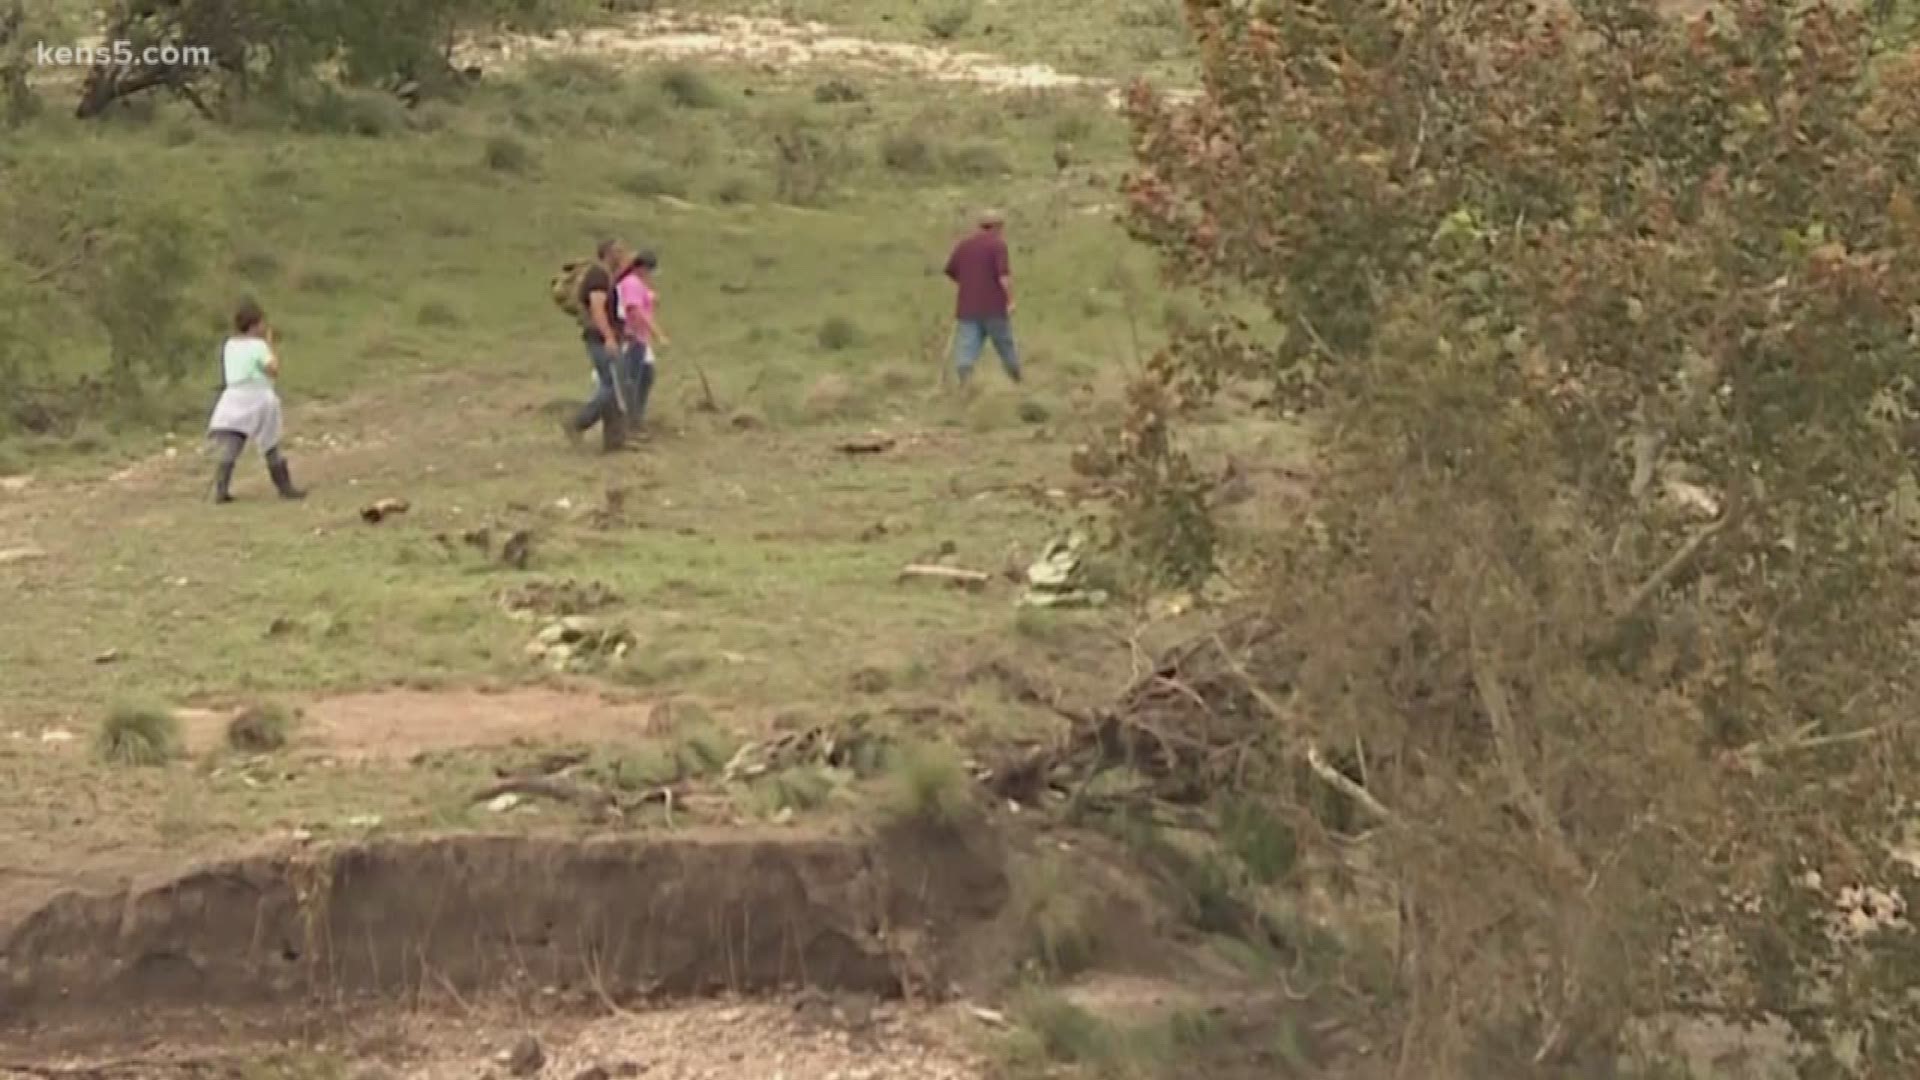 Loved ones have traveled to the banks of the Llano River all the way from Florida to hopefully find their loved ones who went missing on Monday.